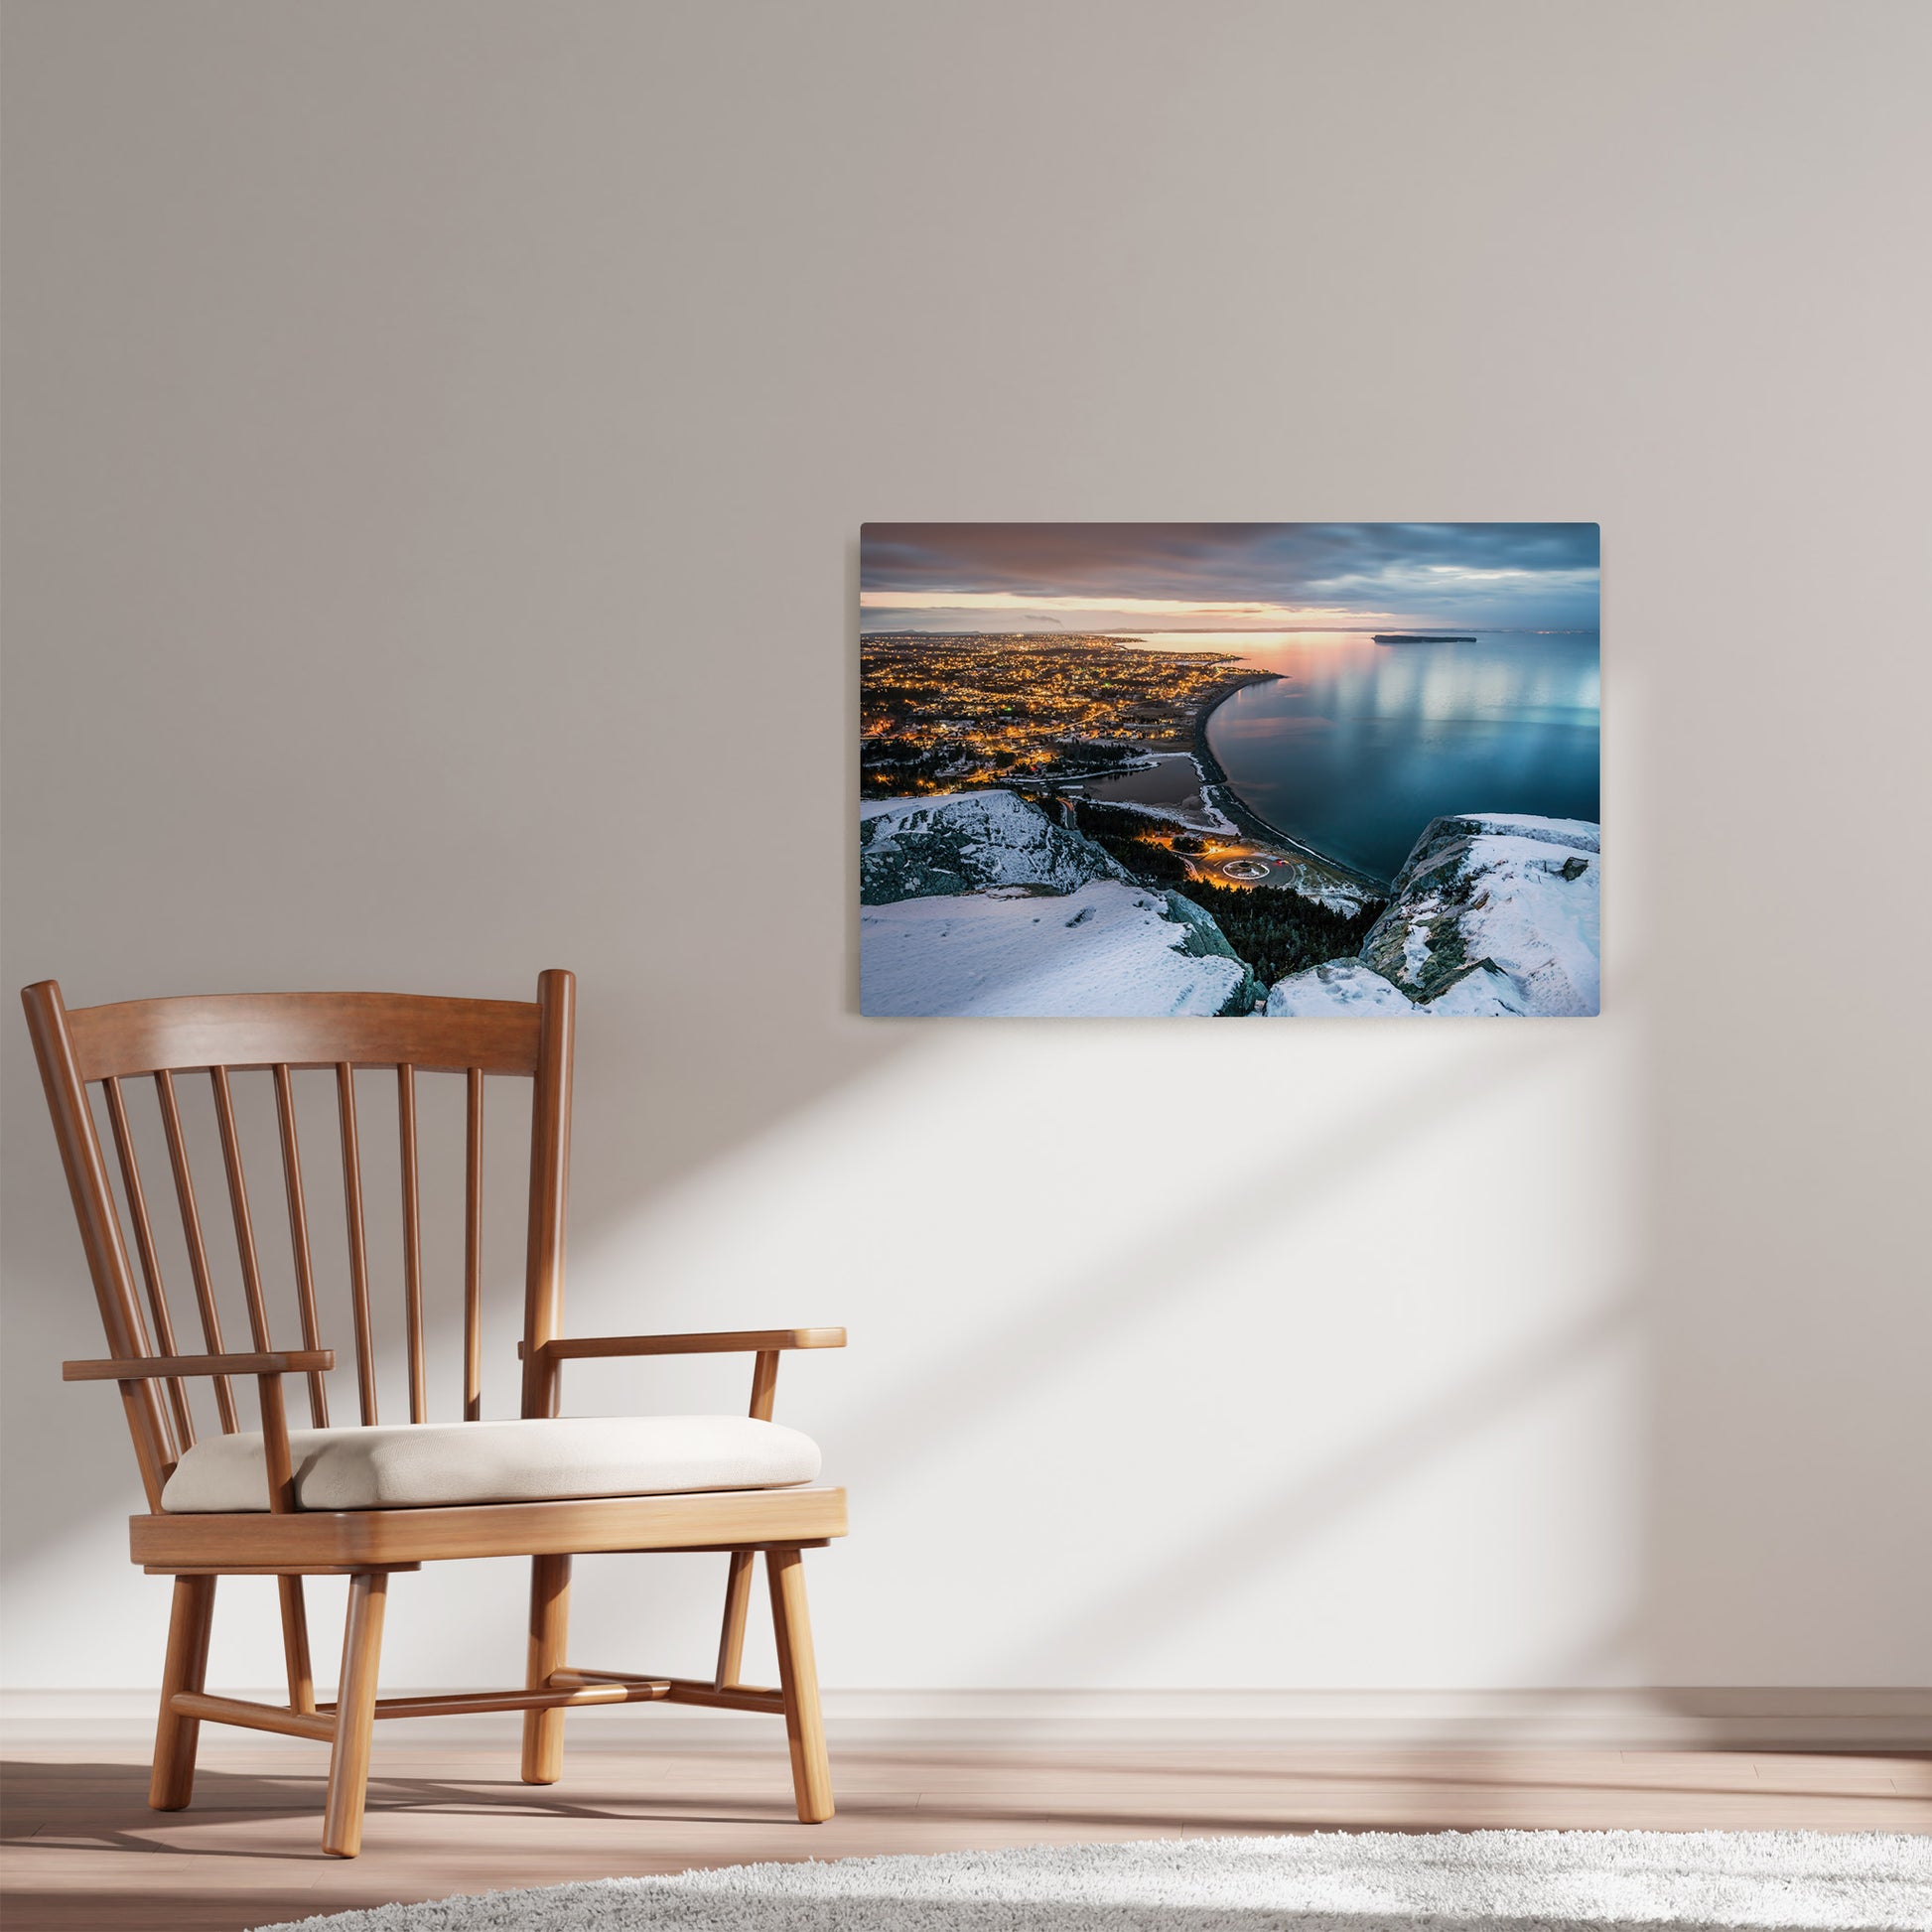 Ray Mackey's Topsail Bluff Winters photography reproduced on HD metal print and displayed on wall